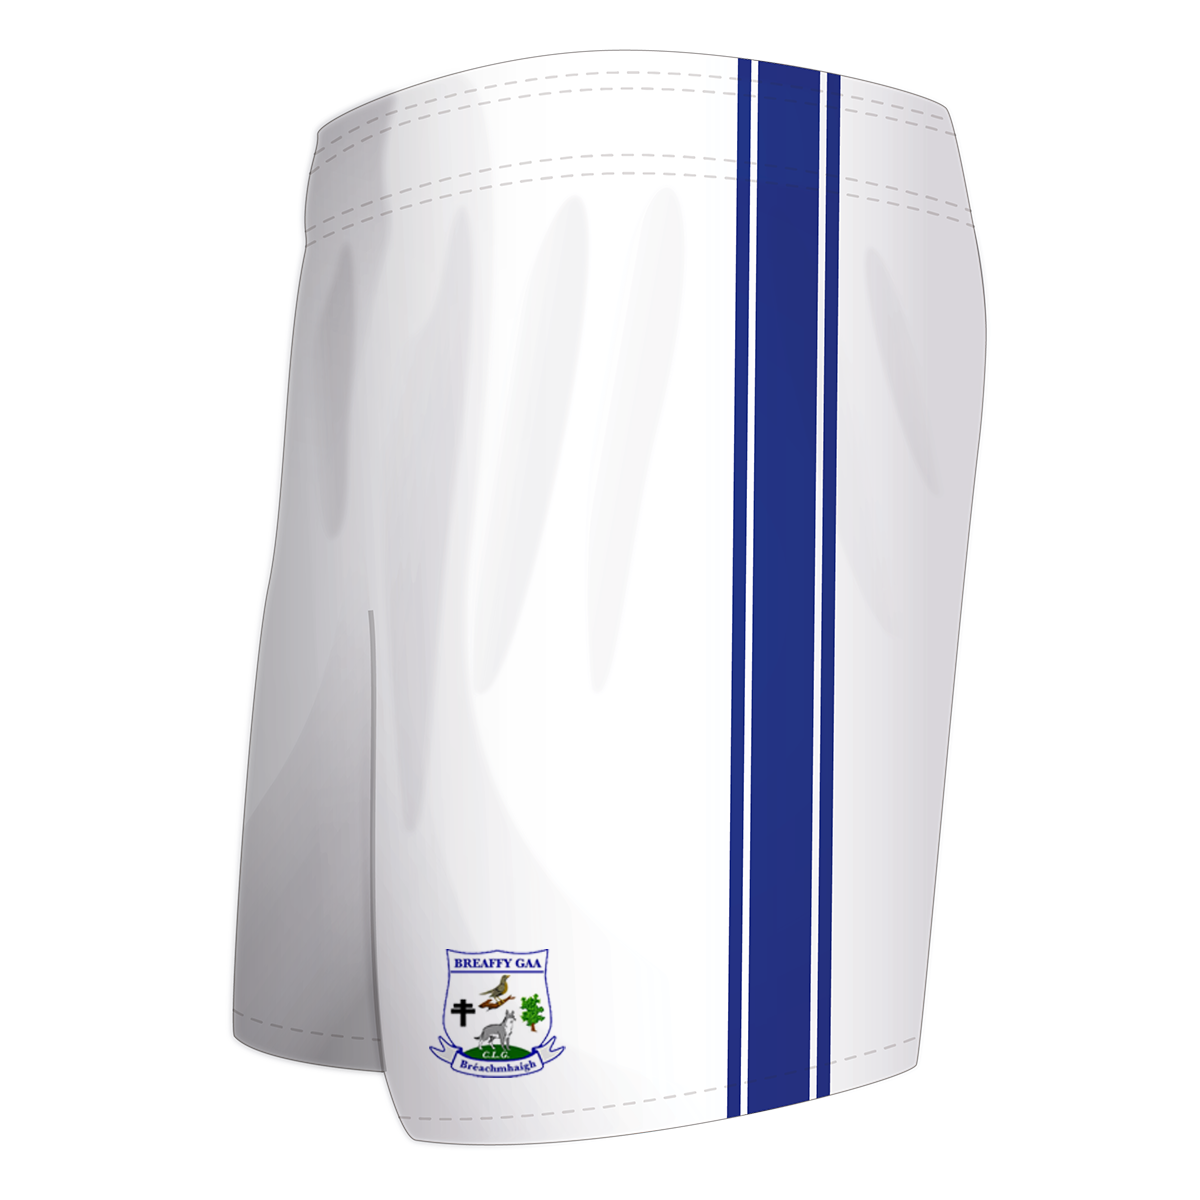 Mc Keever Breaffy GAA Official Playing Shorts - Adult - White/Royal